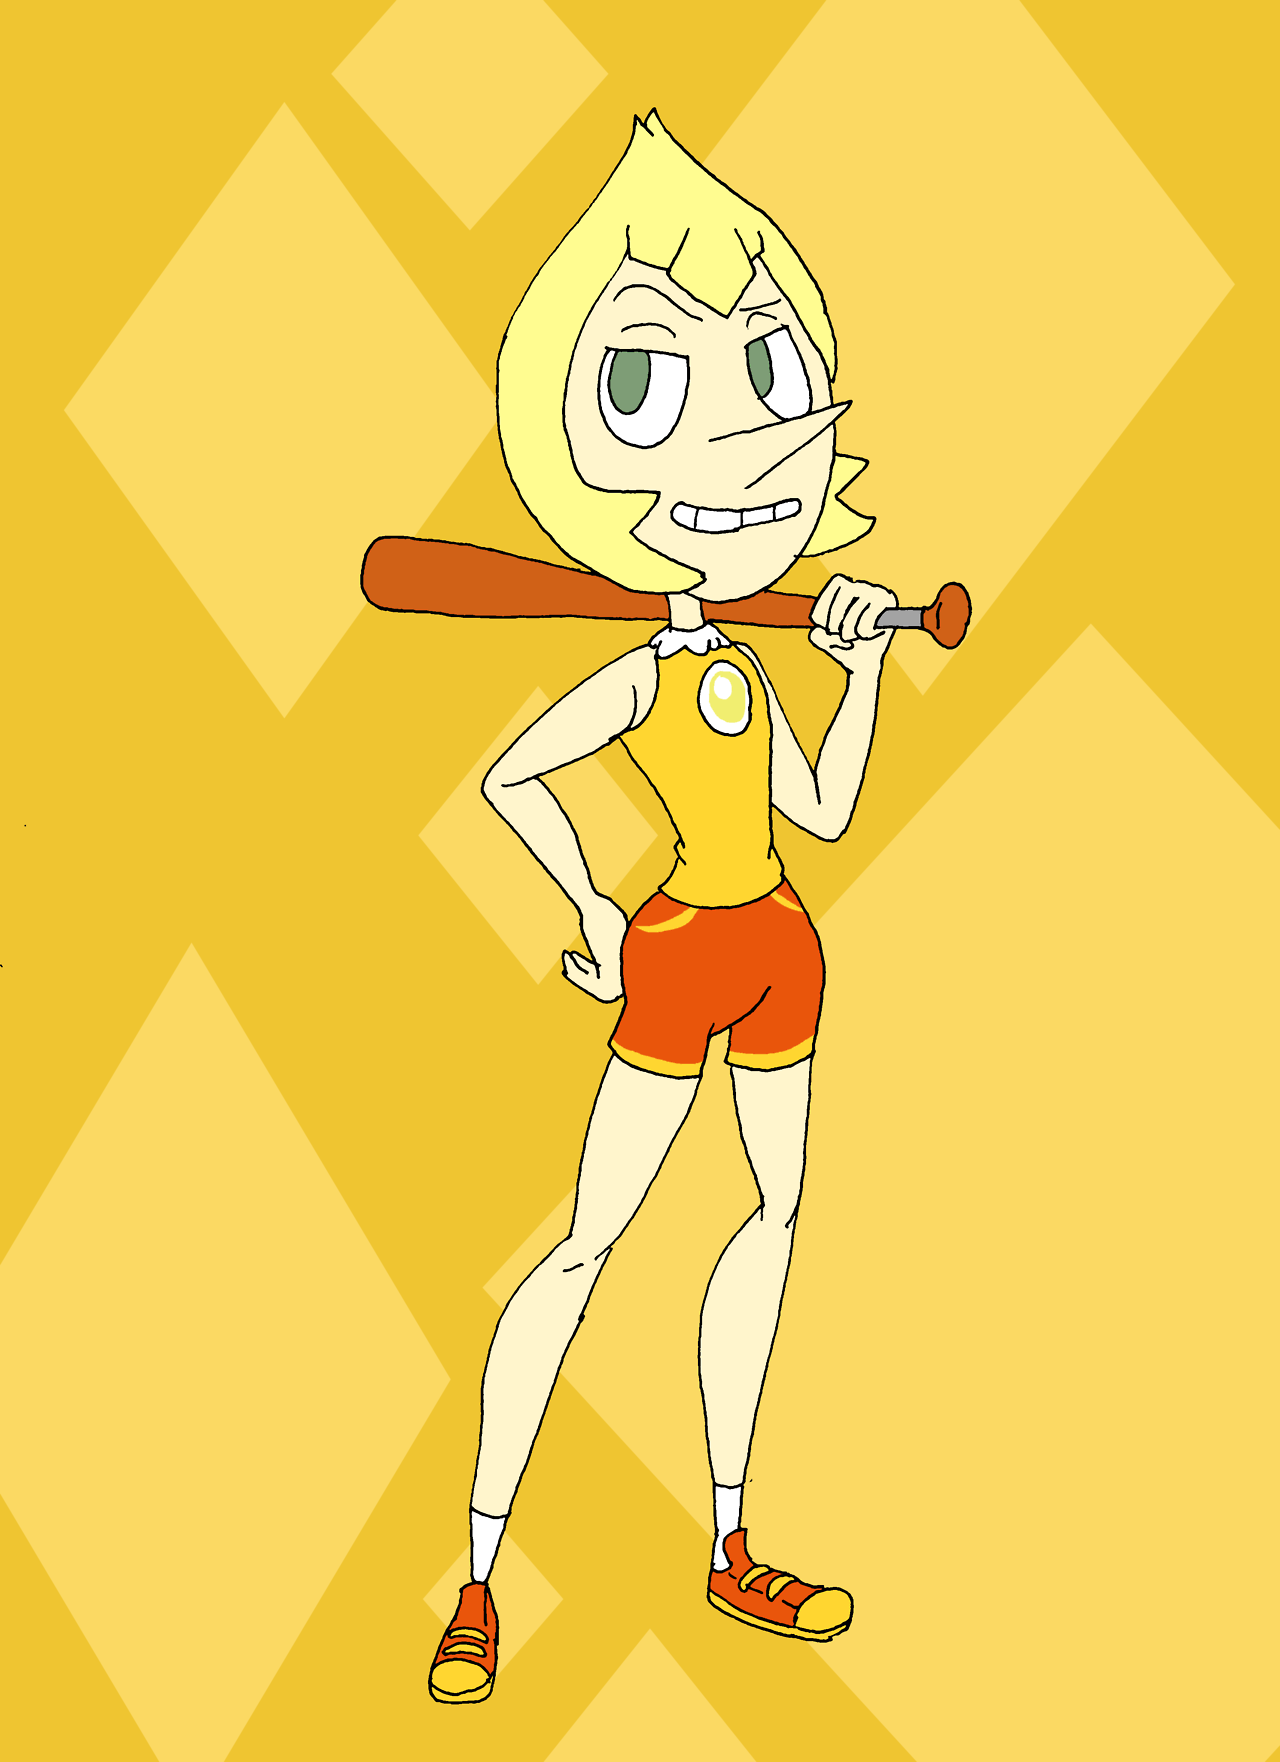 Yellow Pearl/Yellow Diamond’s Pearl in Princess Daisy’s usual sportwear , as well as a baseball bat. I’d be lying if I said it didn’t suit her!